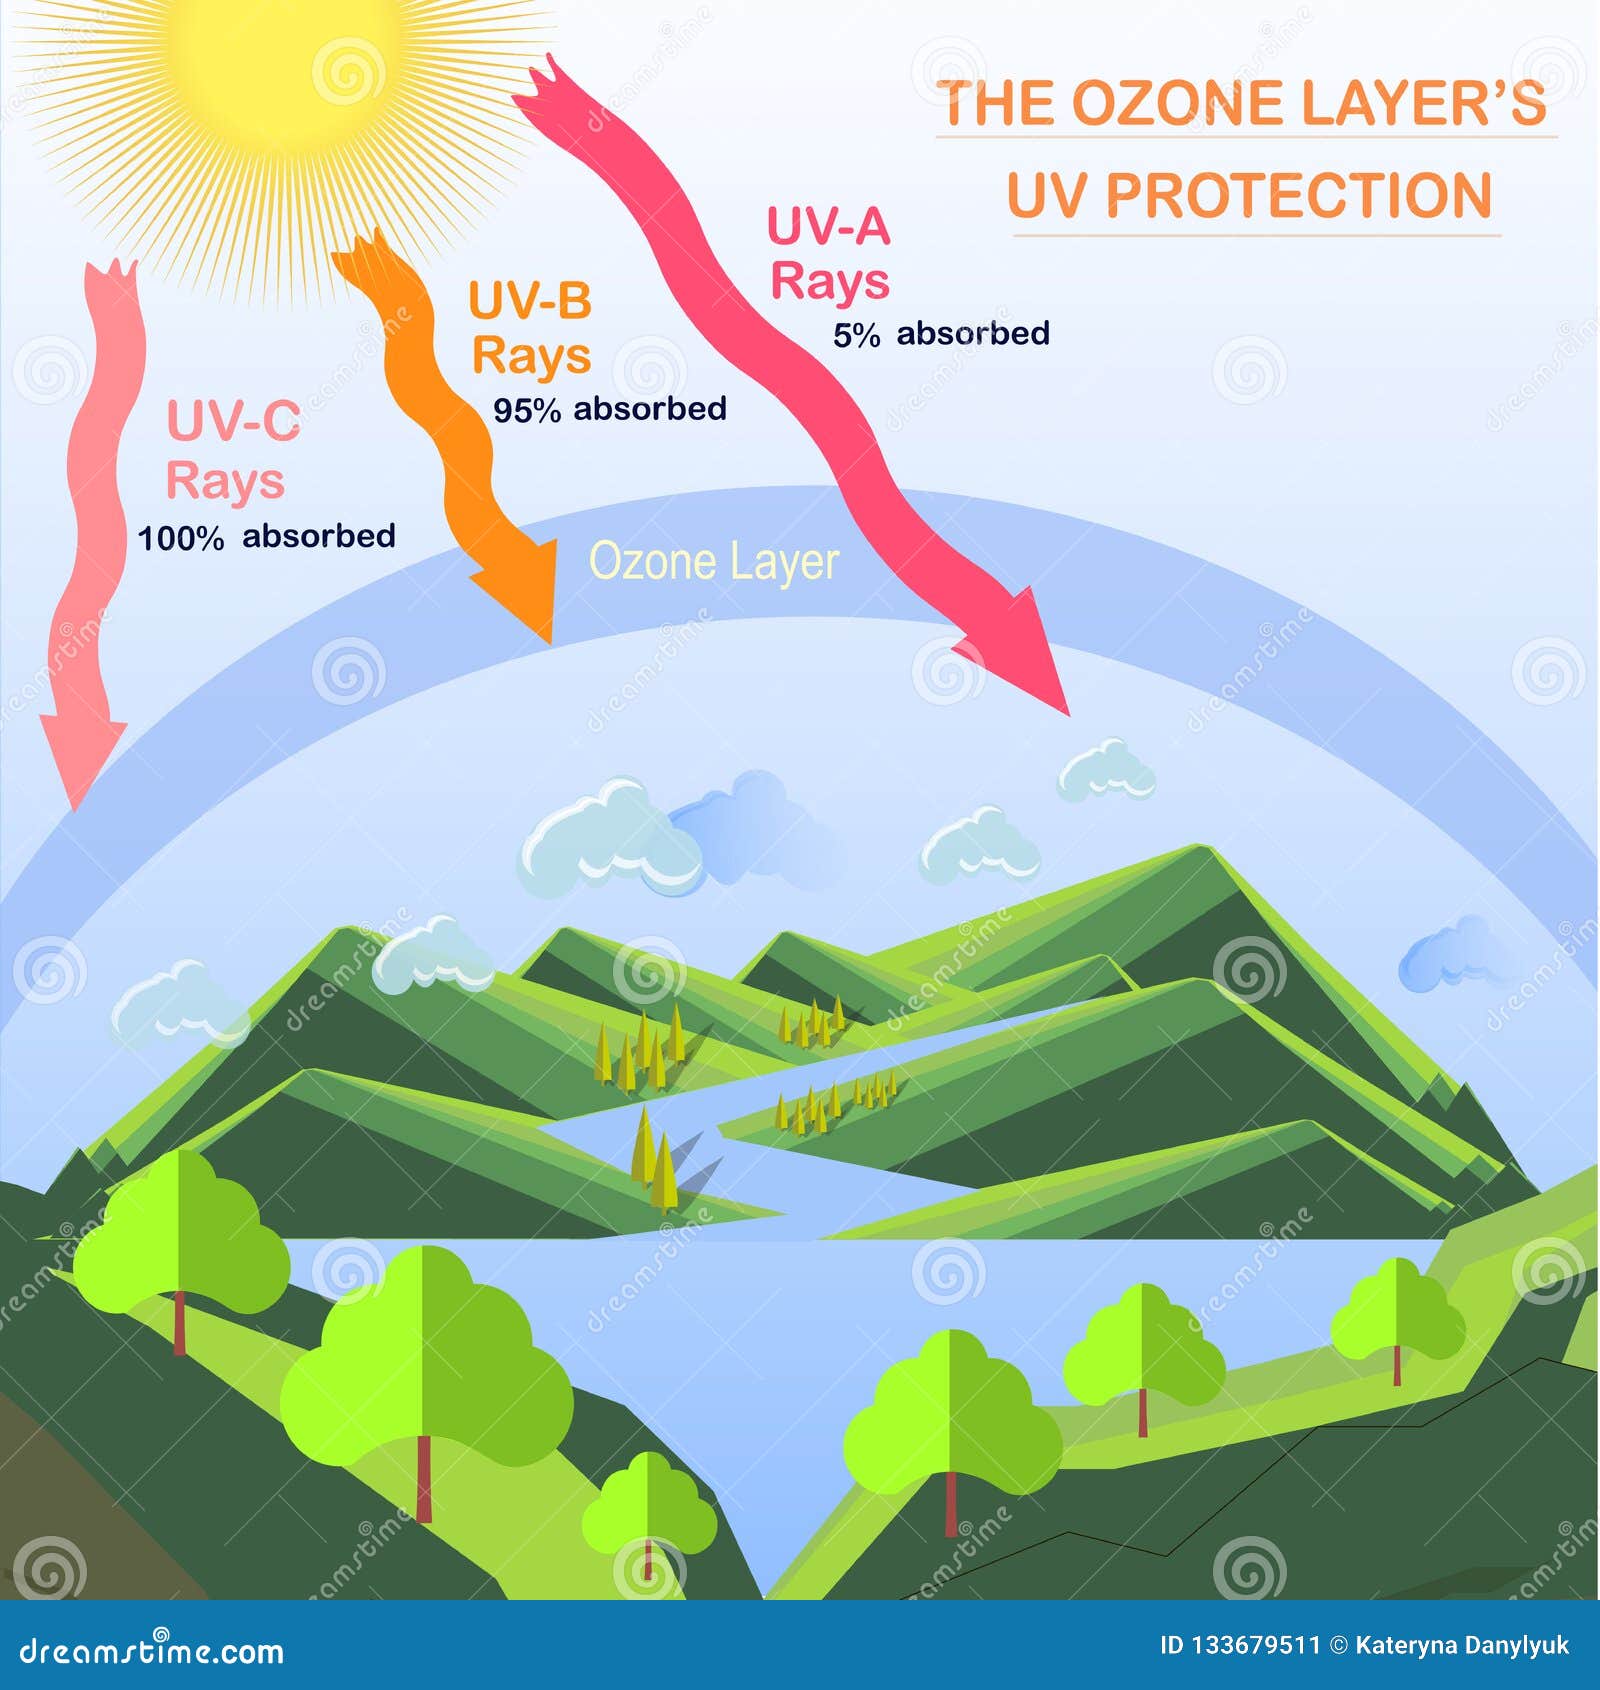 scheme of the ozone layer uv protection